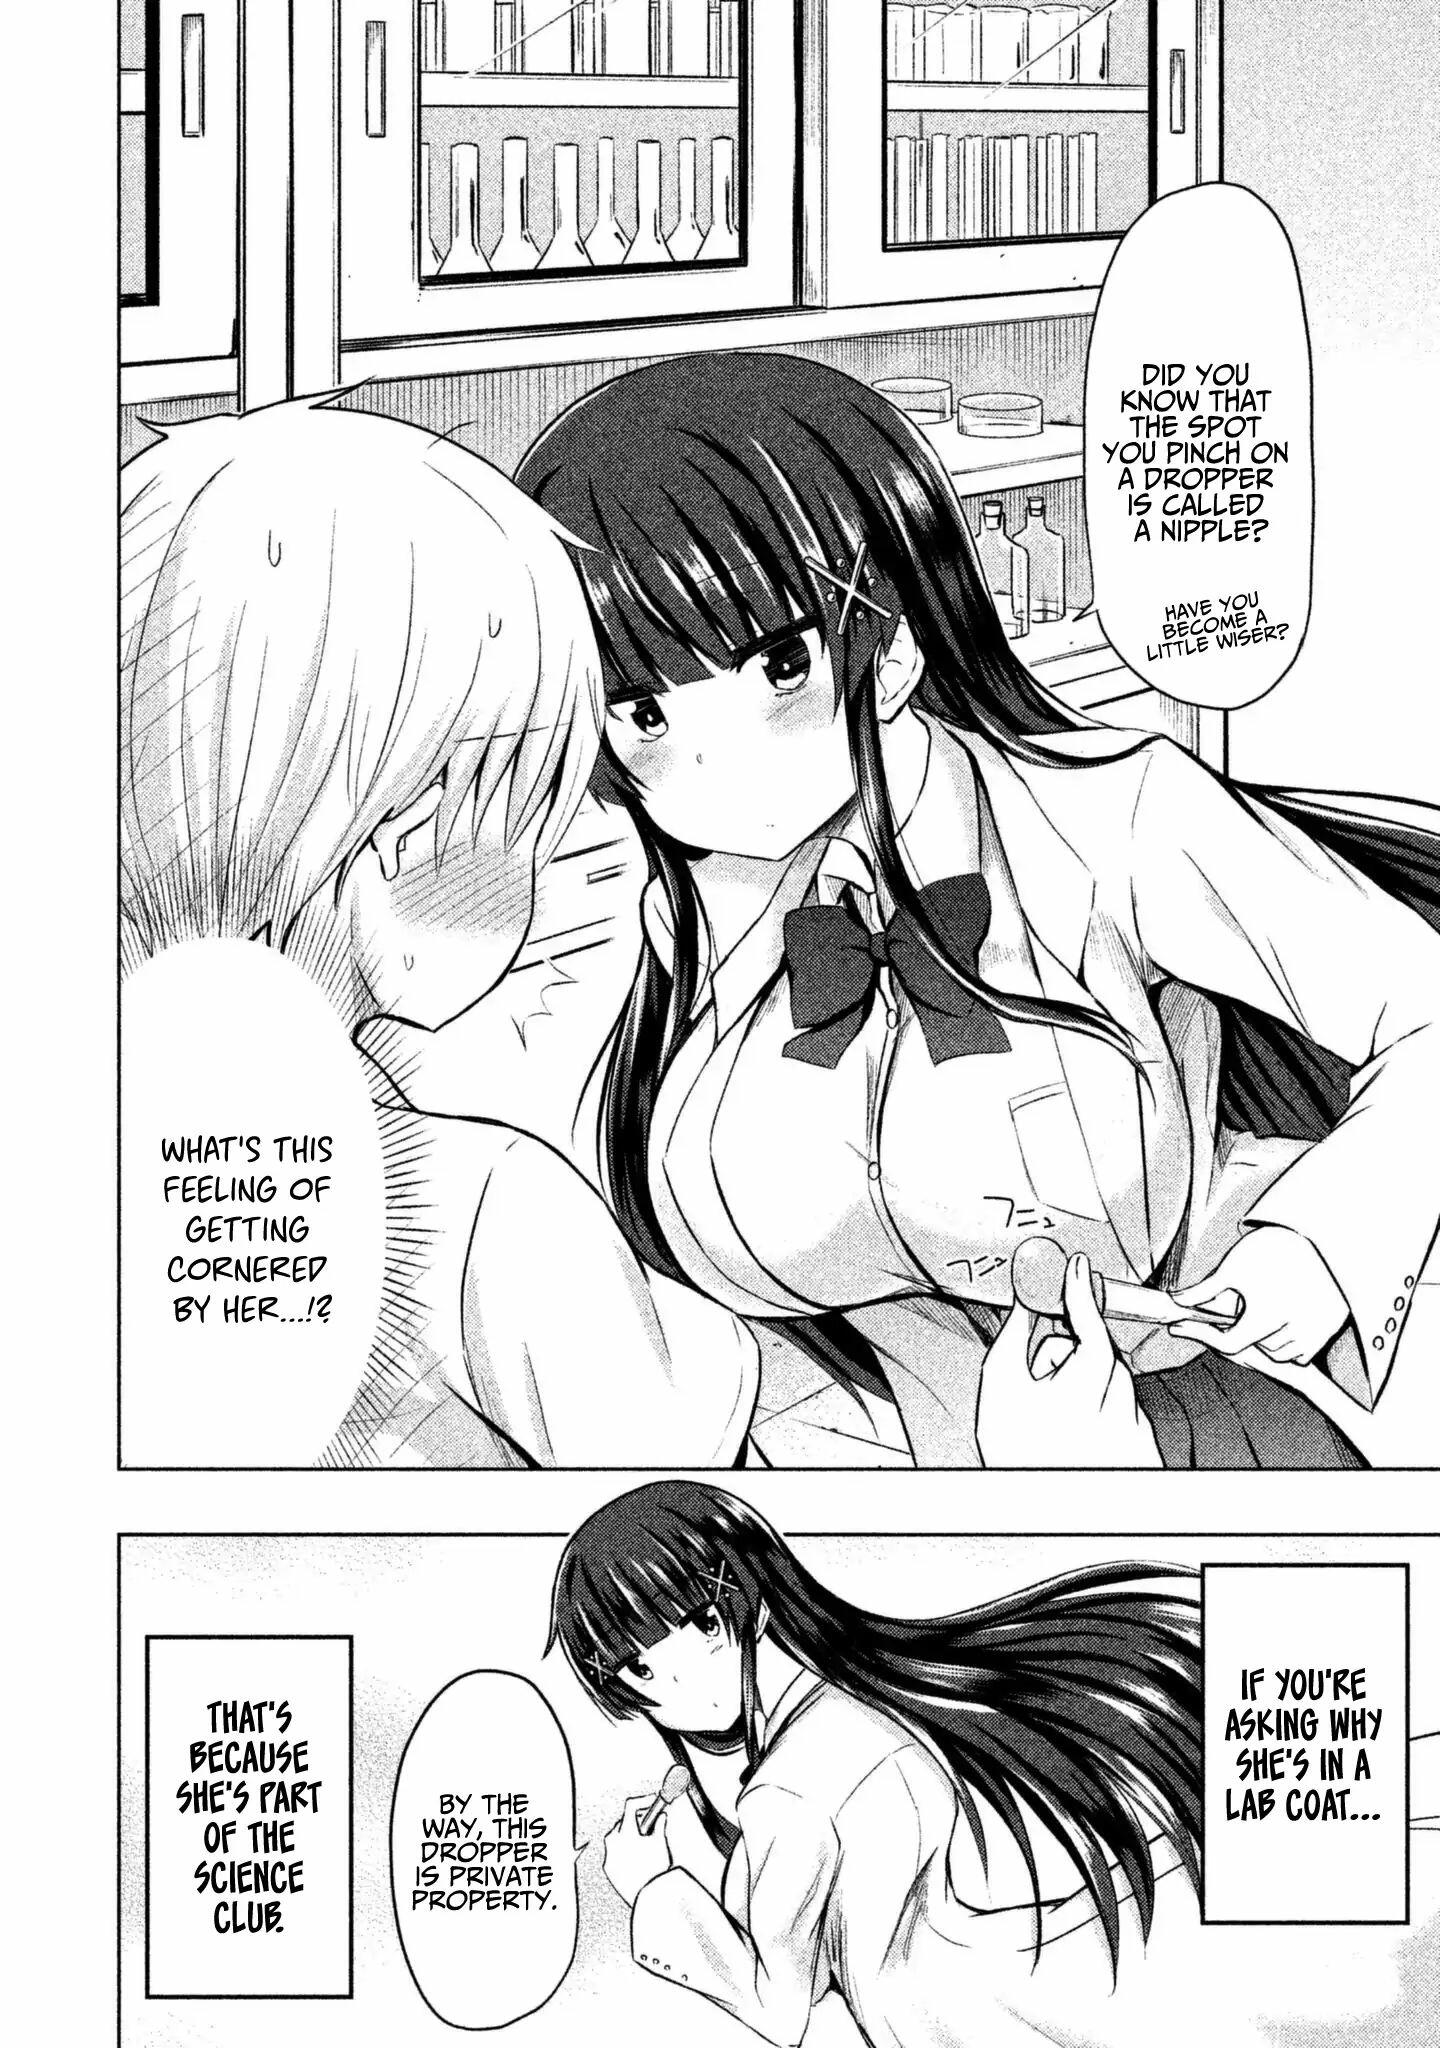 A Girl Who Is Very Well-Informed About Weird Knowledge, Takayukashiki Souko-San Vol.1 Chapter 9: Science Club page 3 - Mangakakalots.com